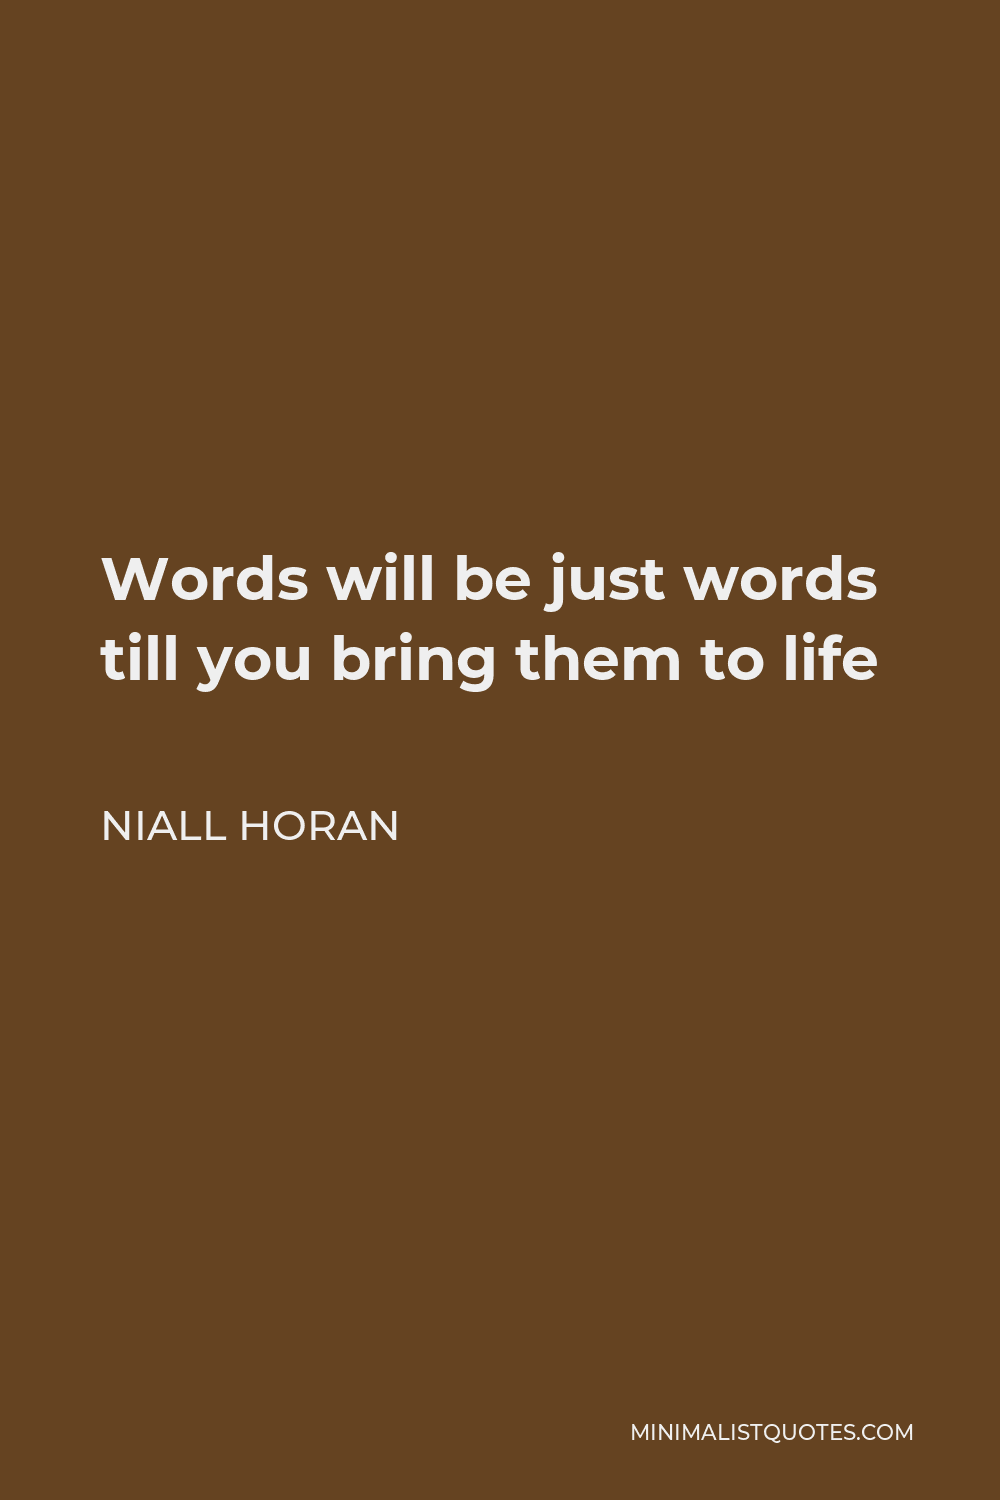 Niall Horan Quote - Words will be just words till you bring them to life